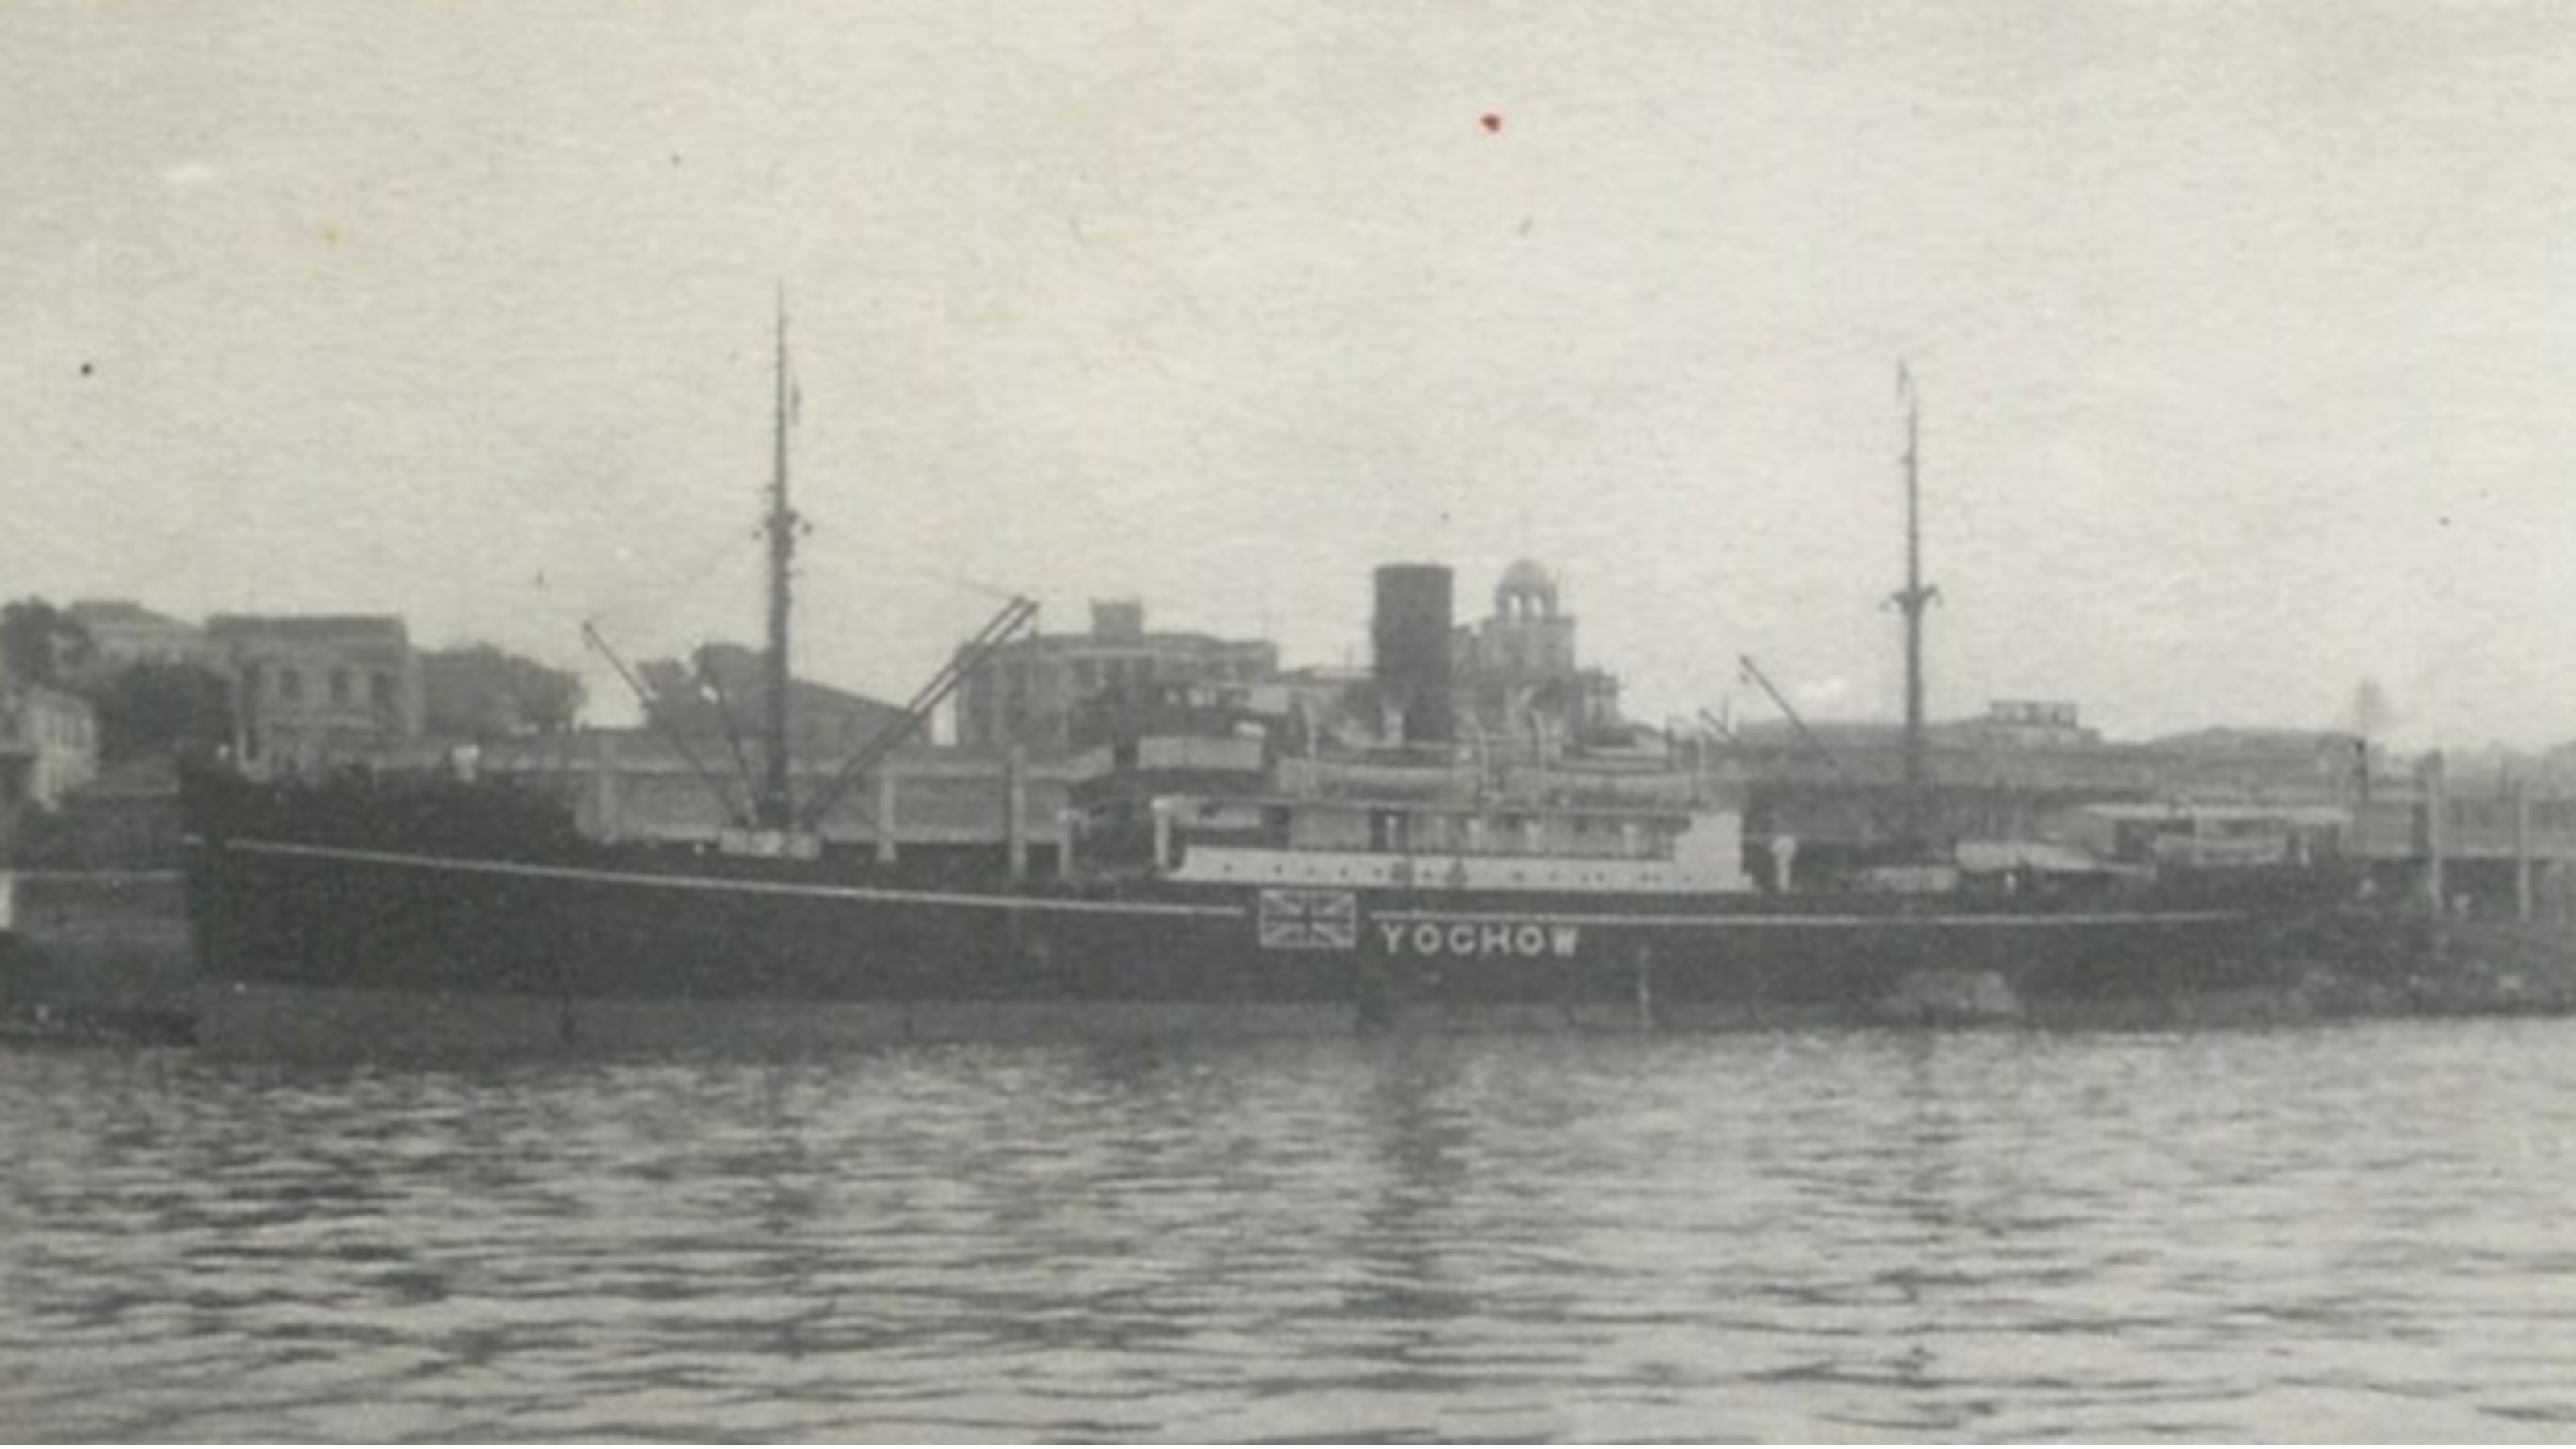 photograph of S.S. YoChow